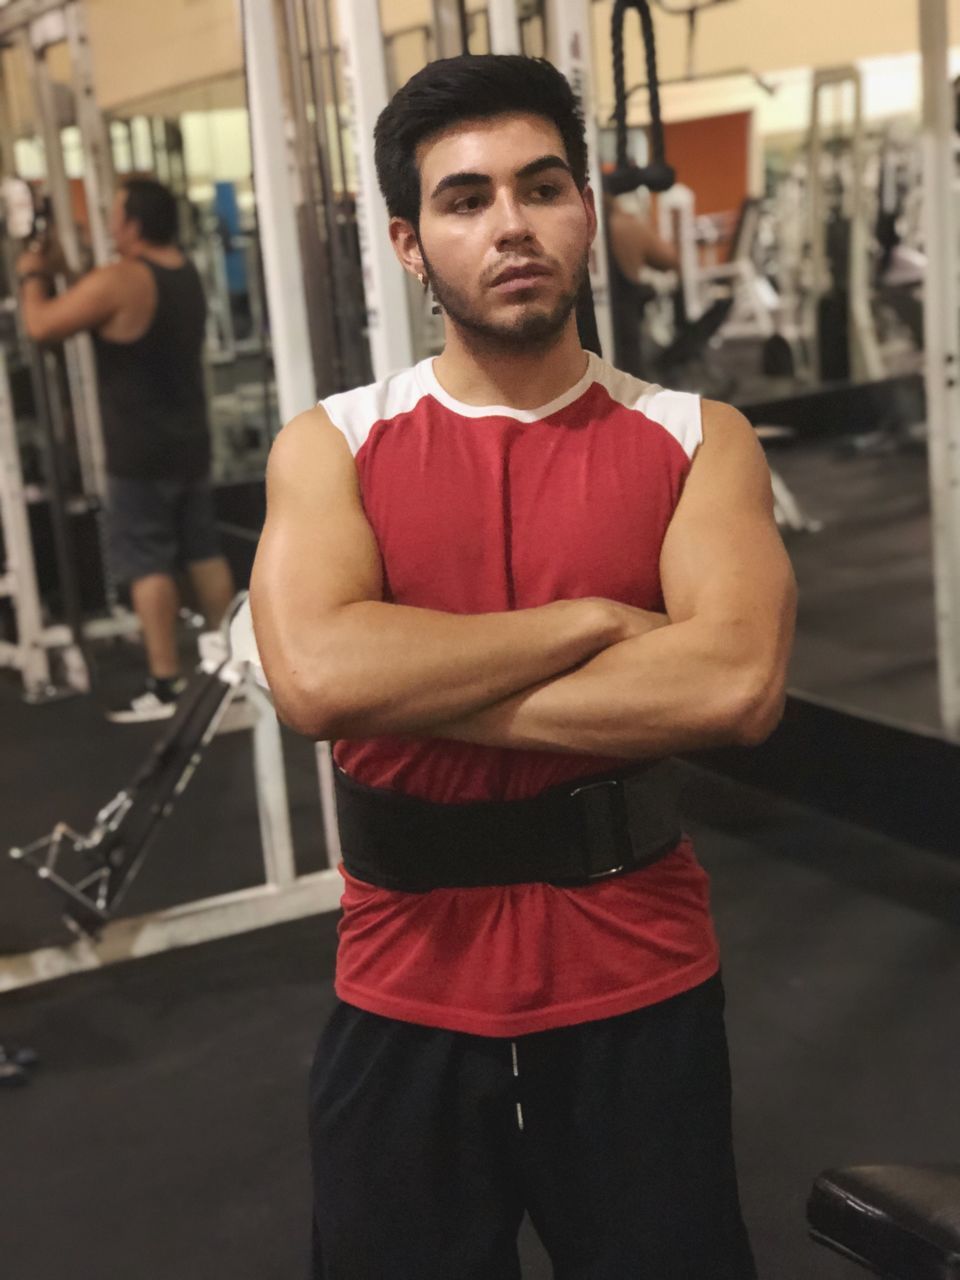 looking at camera, young men, portrait, one person, young adult, three quarter length, strength, indoors, standing, gym, healthy lifestyle, sports training, sport, exercising, lifestyles, front view, real people, focus on foreground